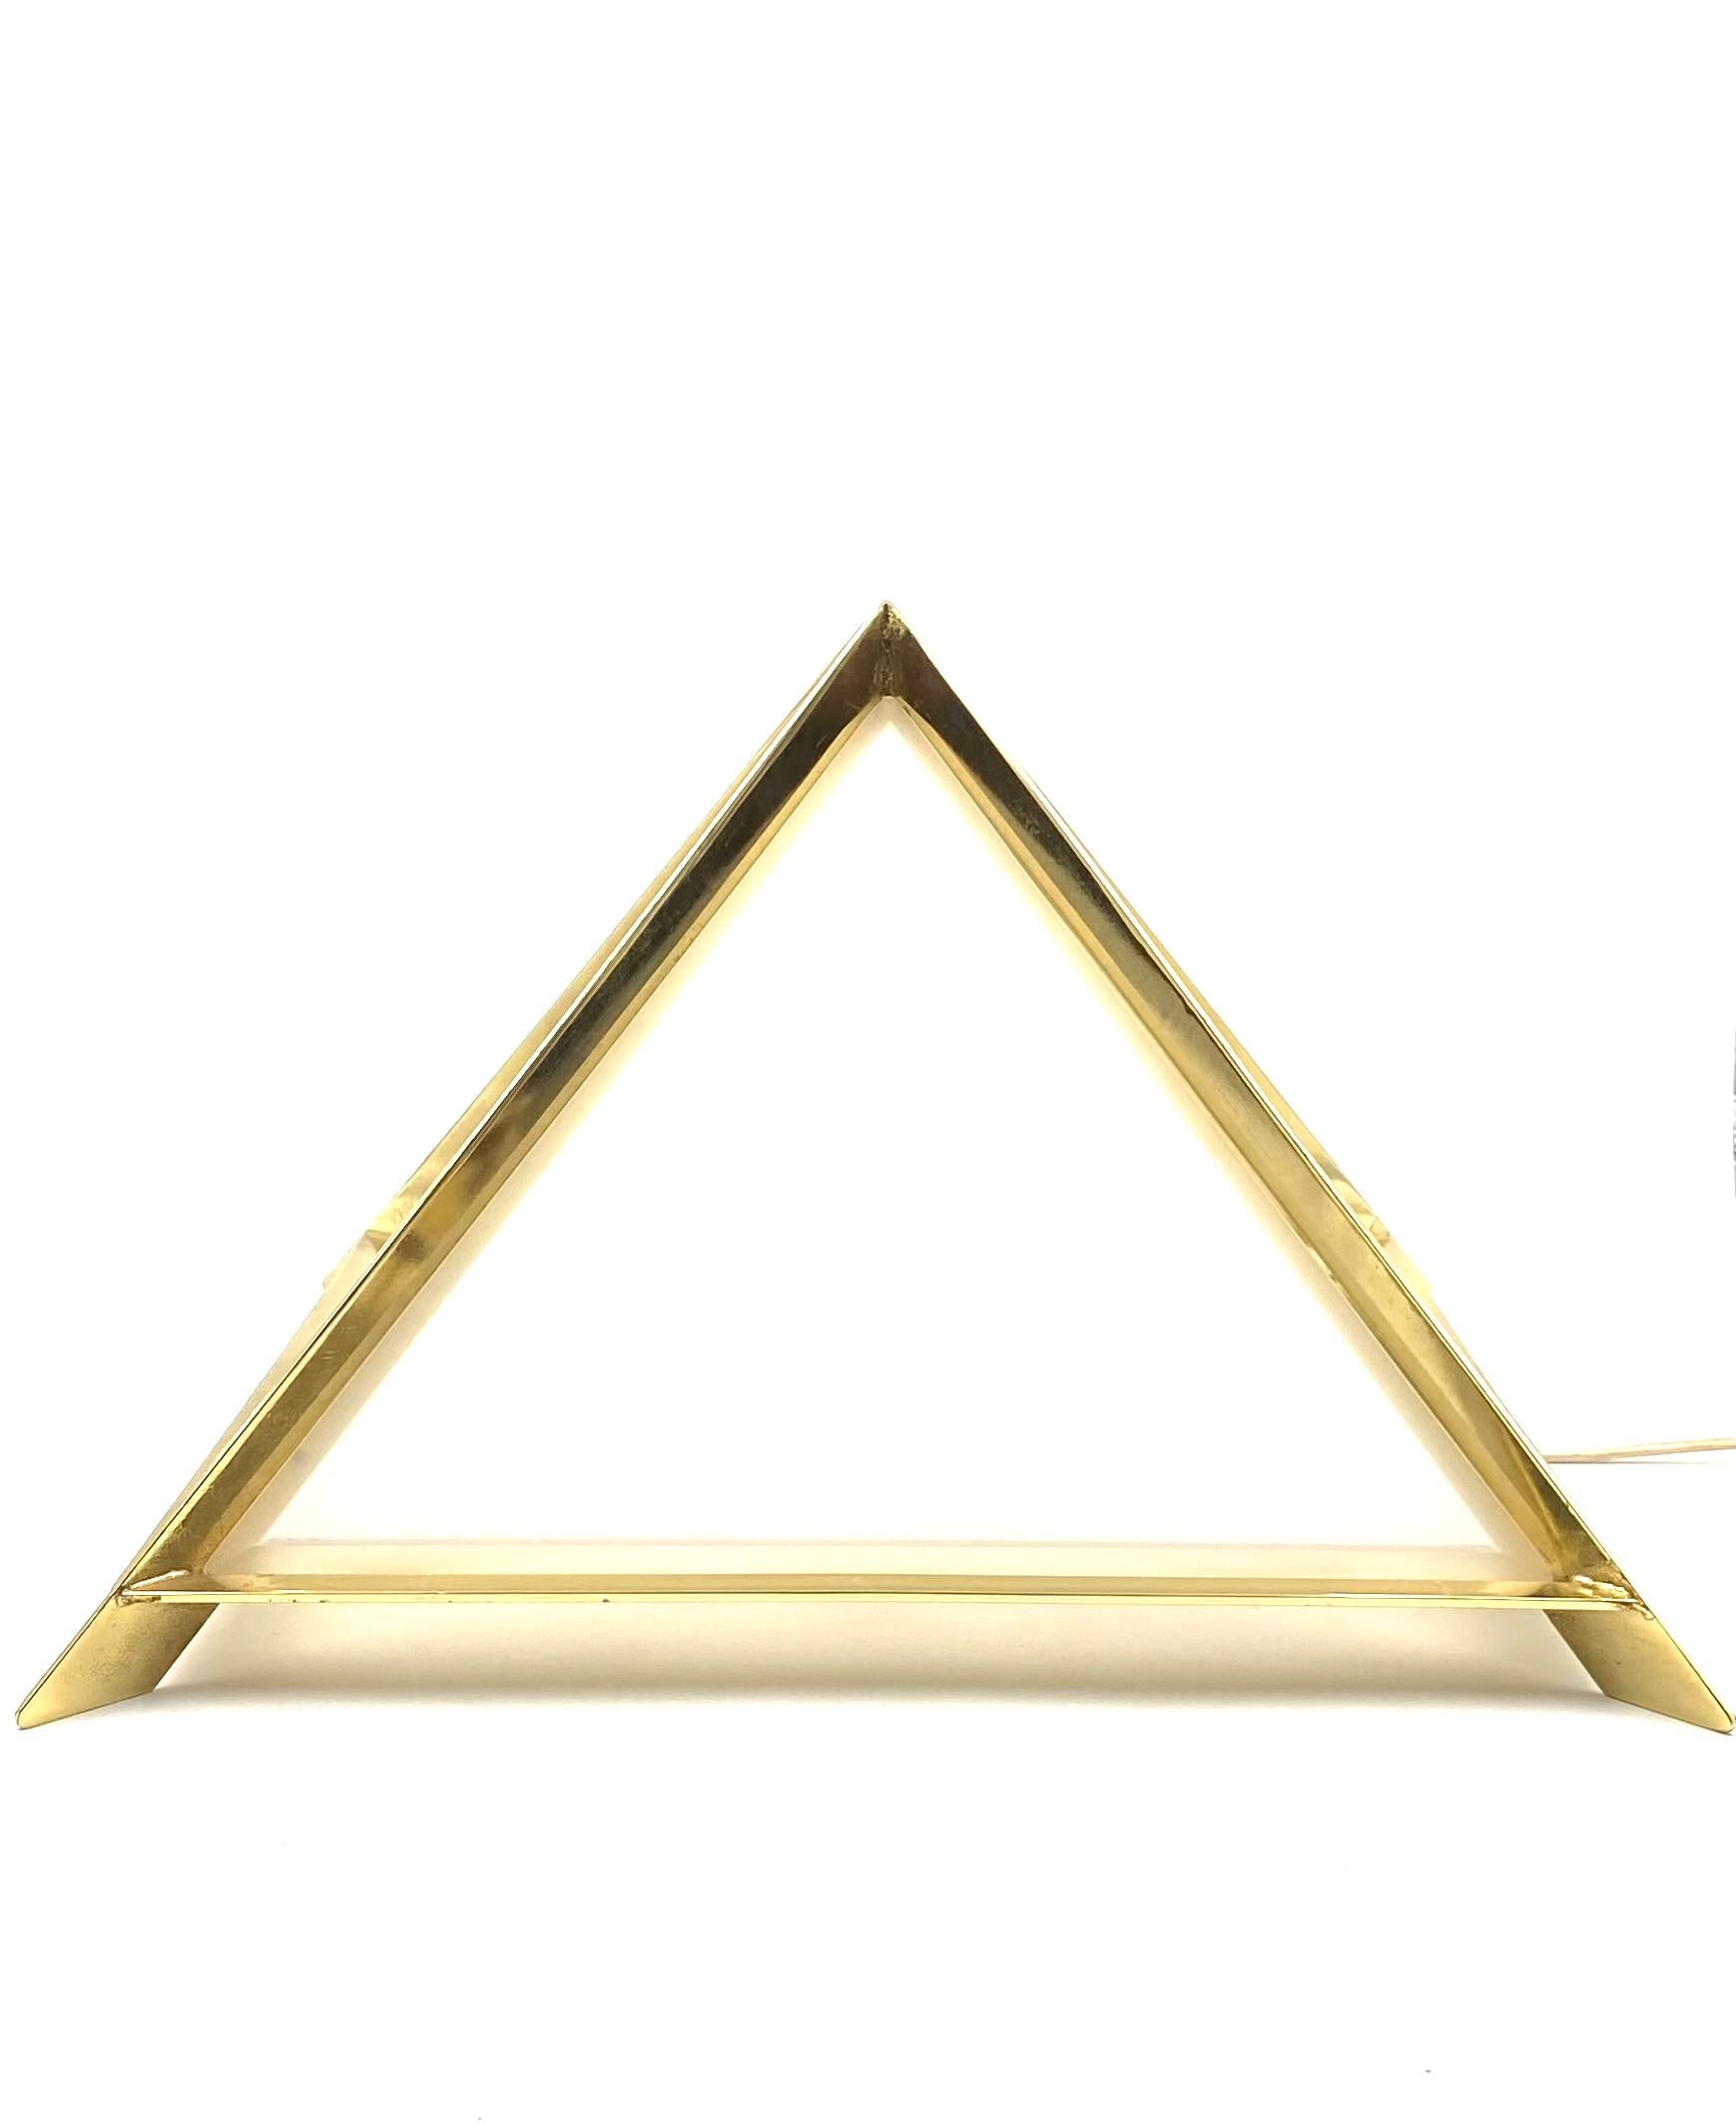 Golden Brass Pyramidal Table Lamp, Christos, Italy, 1970 For Sale 6